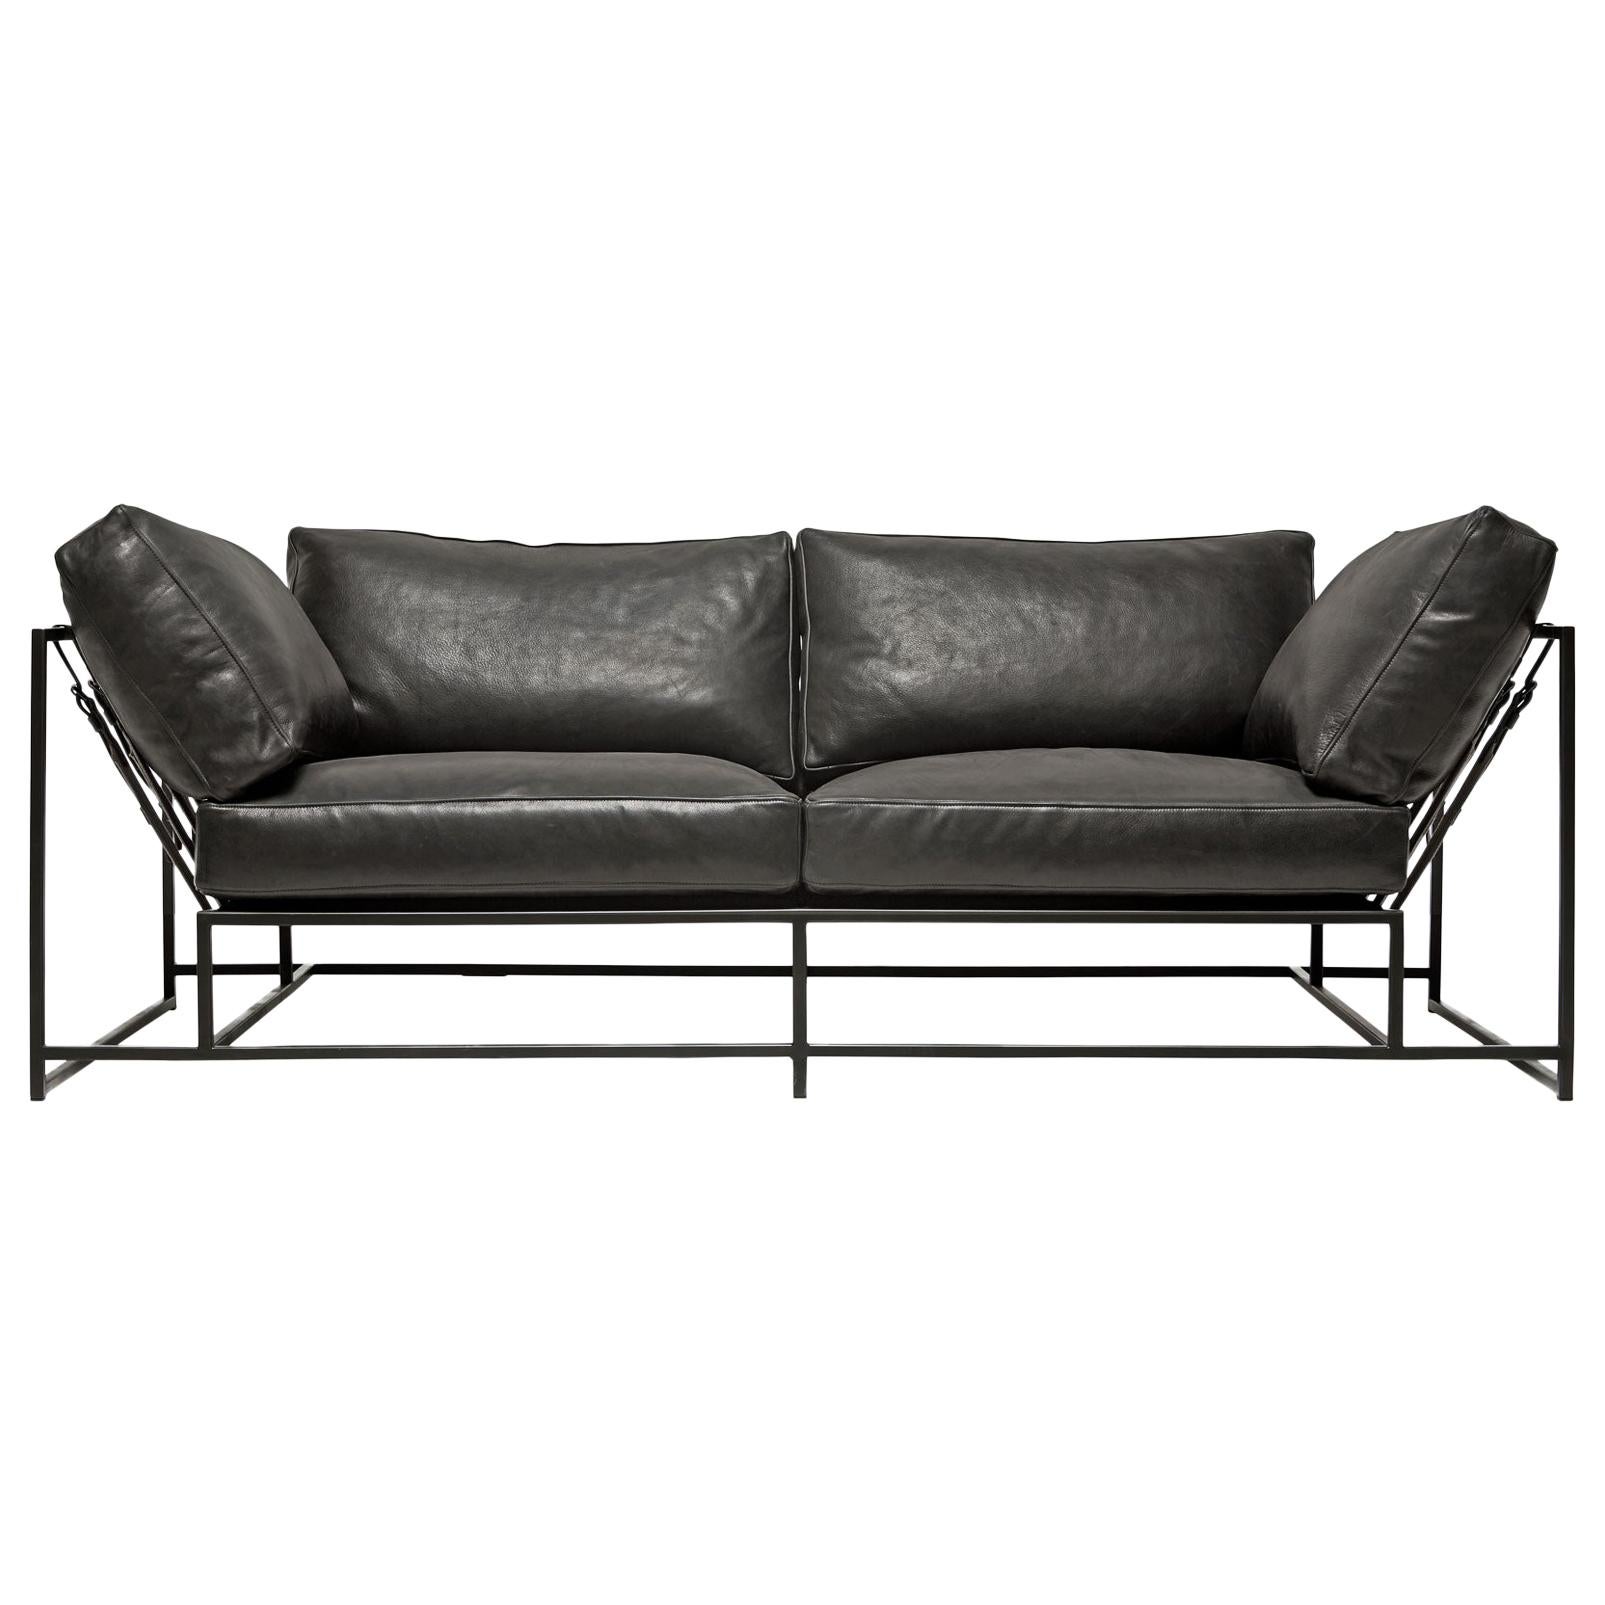 Pebbled Black Leather and Blackened Steel Two-Seat Sofa